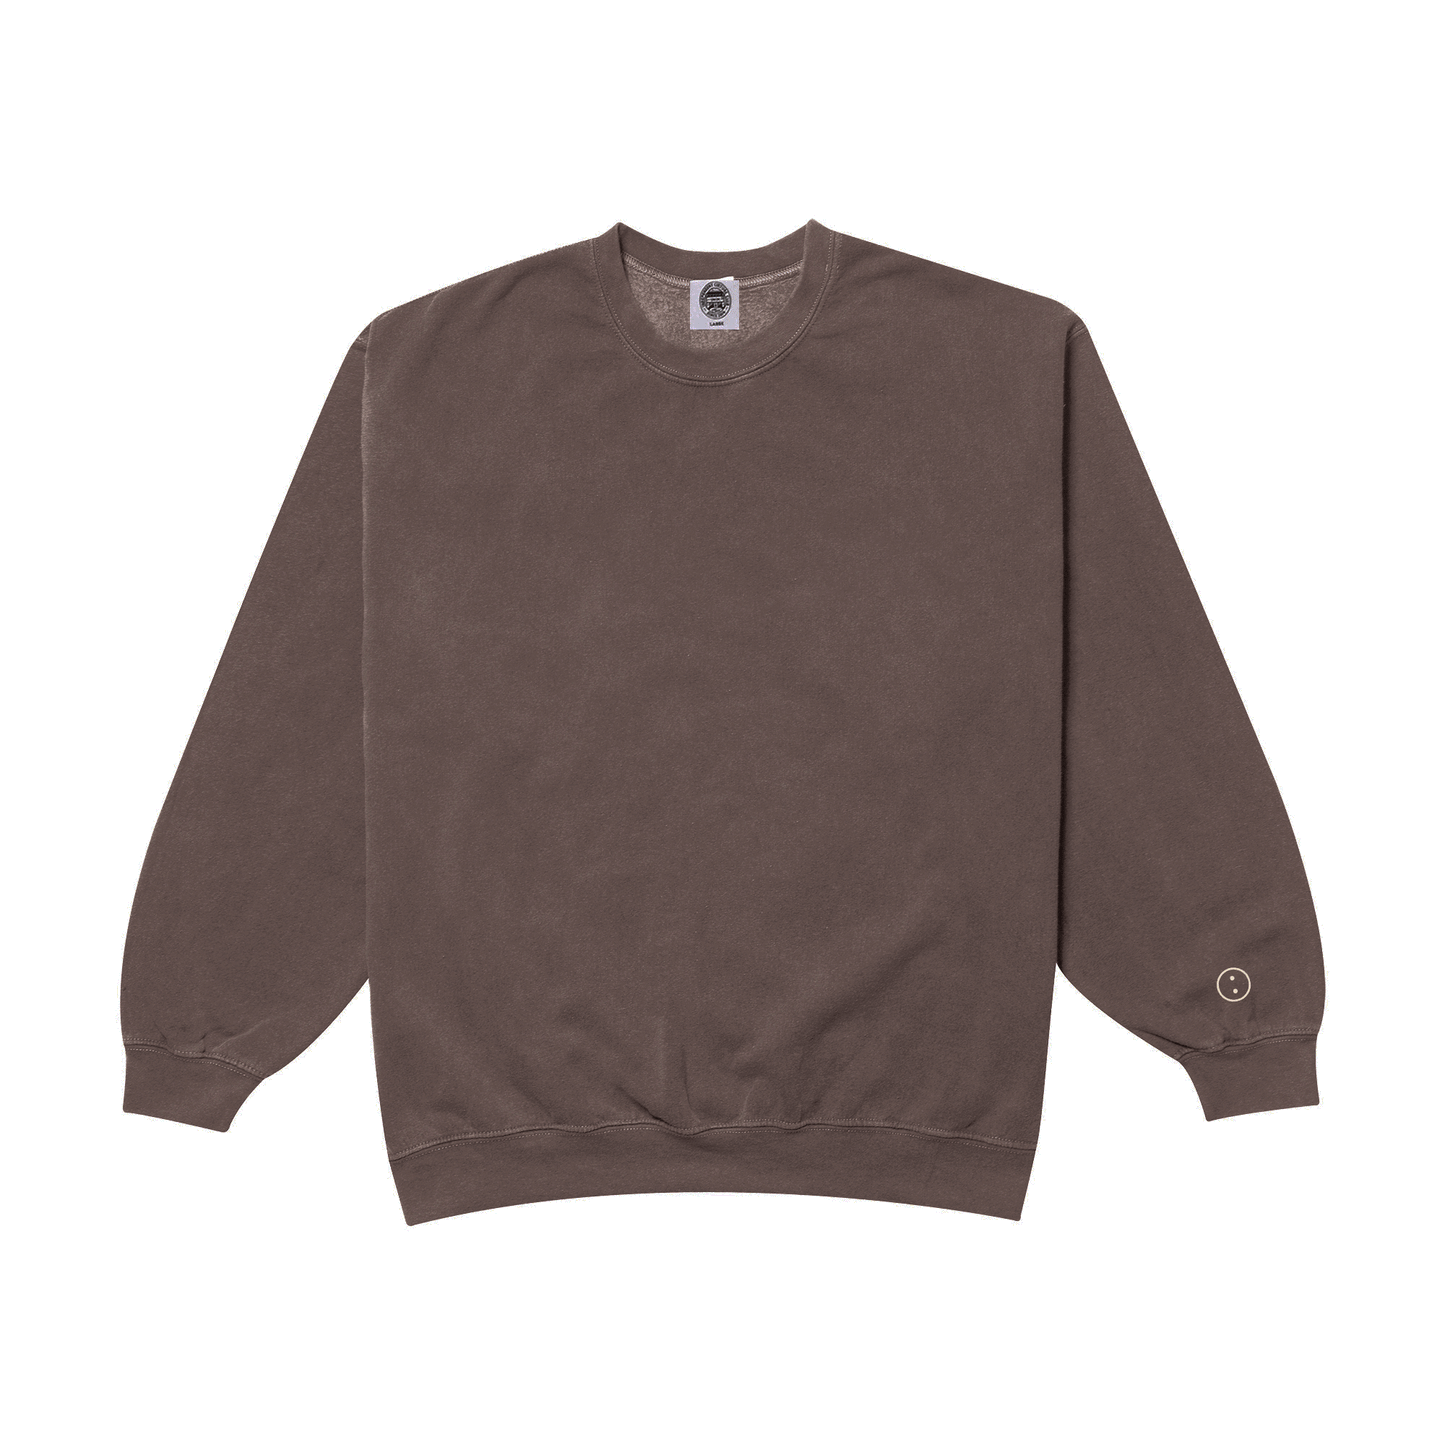 Essentials Vintage Washed Sweater - Cocoa